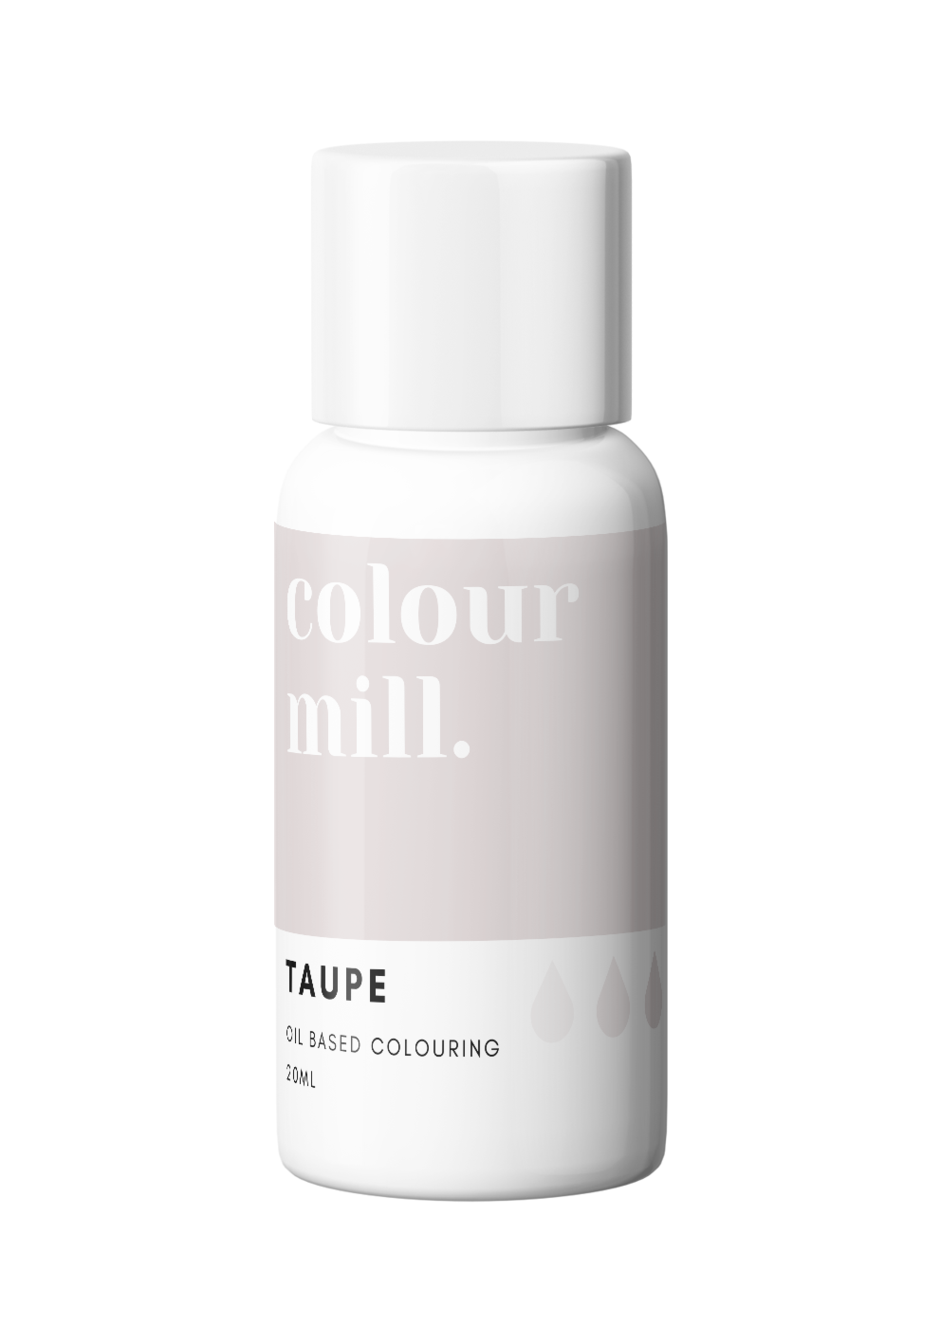 Taupe, 20ml, Colour Mill Oil Based Colouring